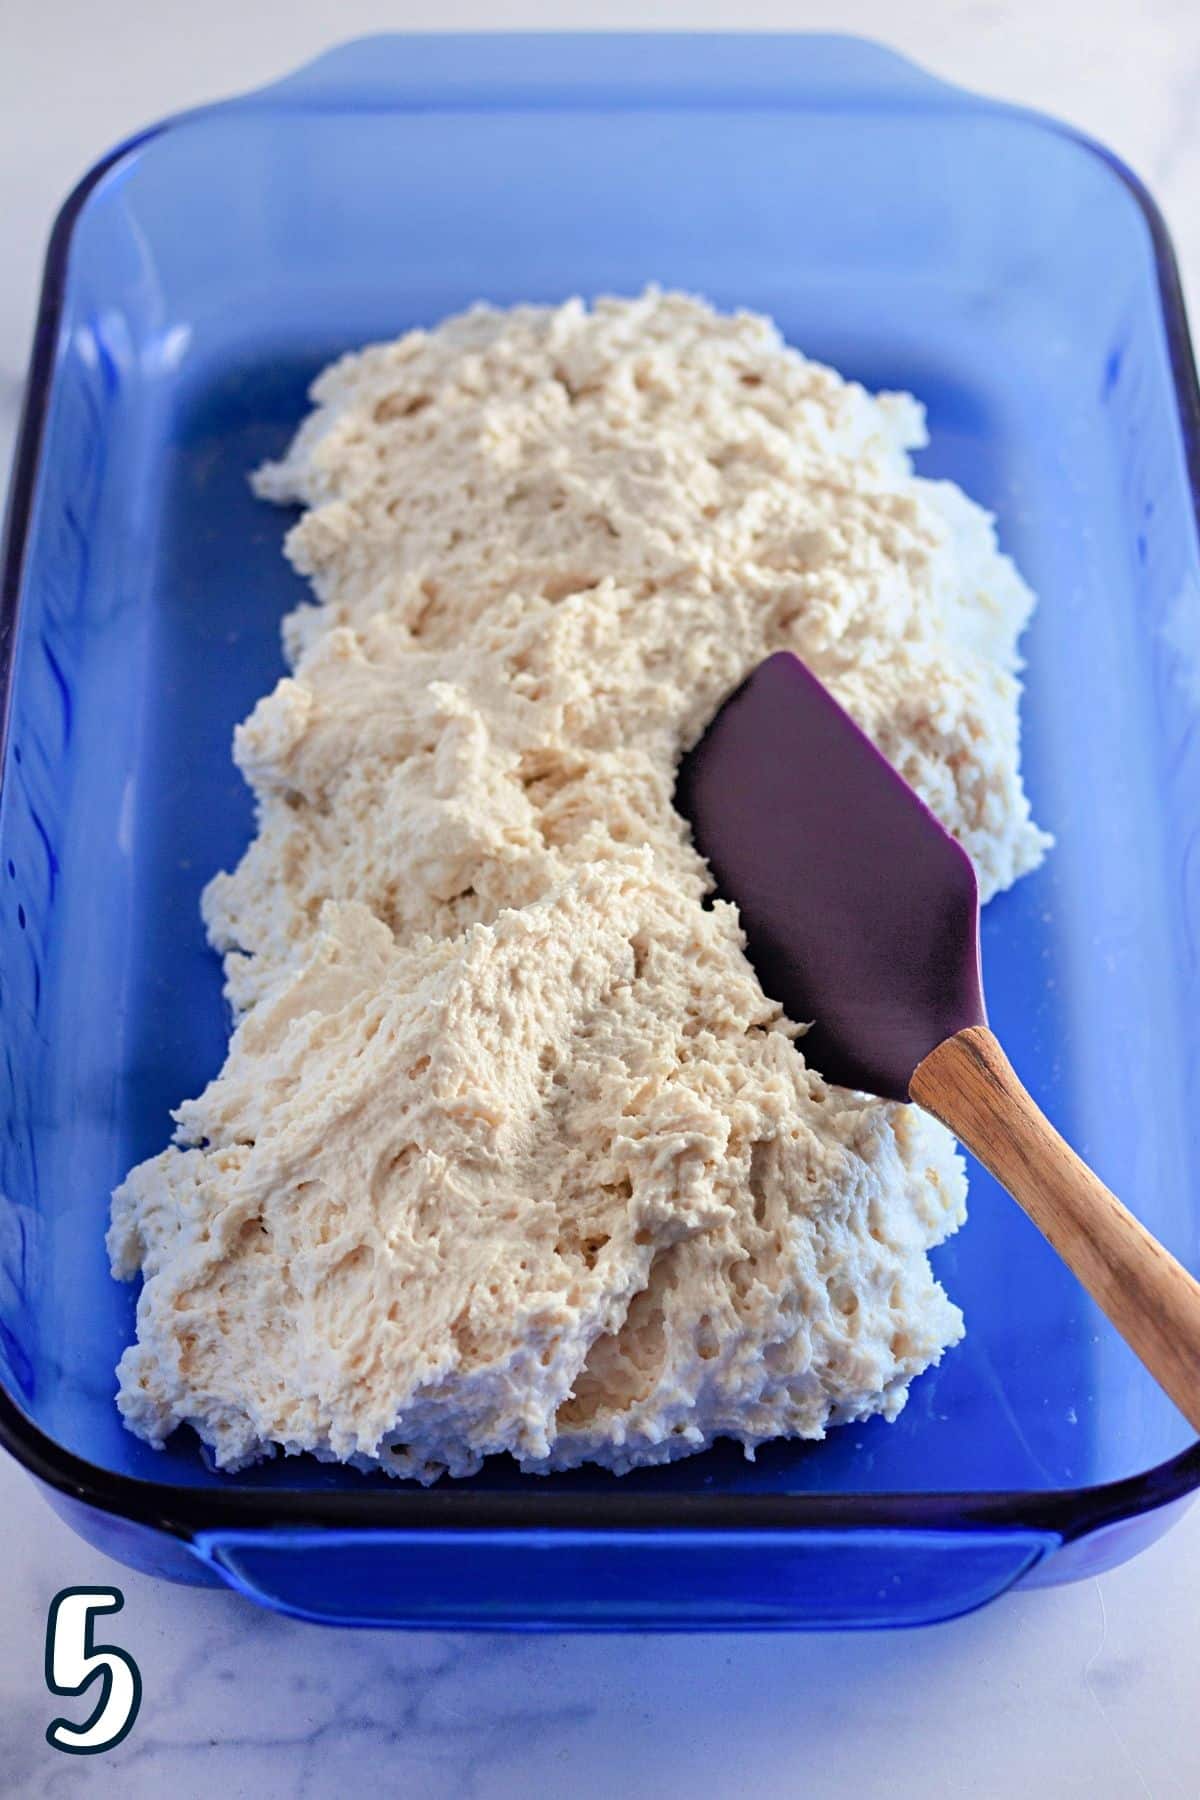 Biscuit dough being poured into a blue baking dish. 